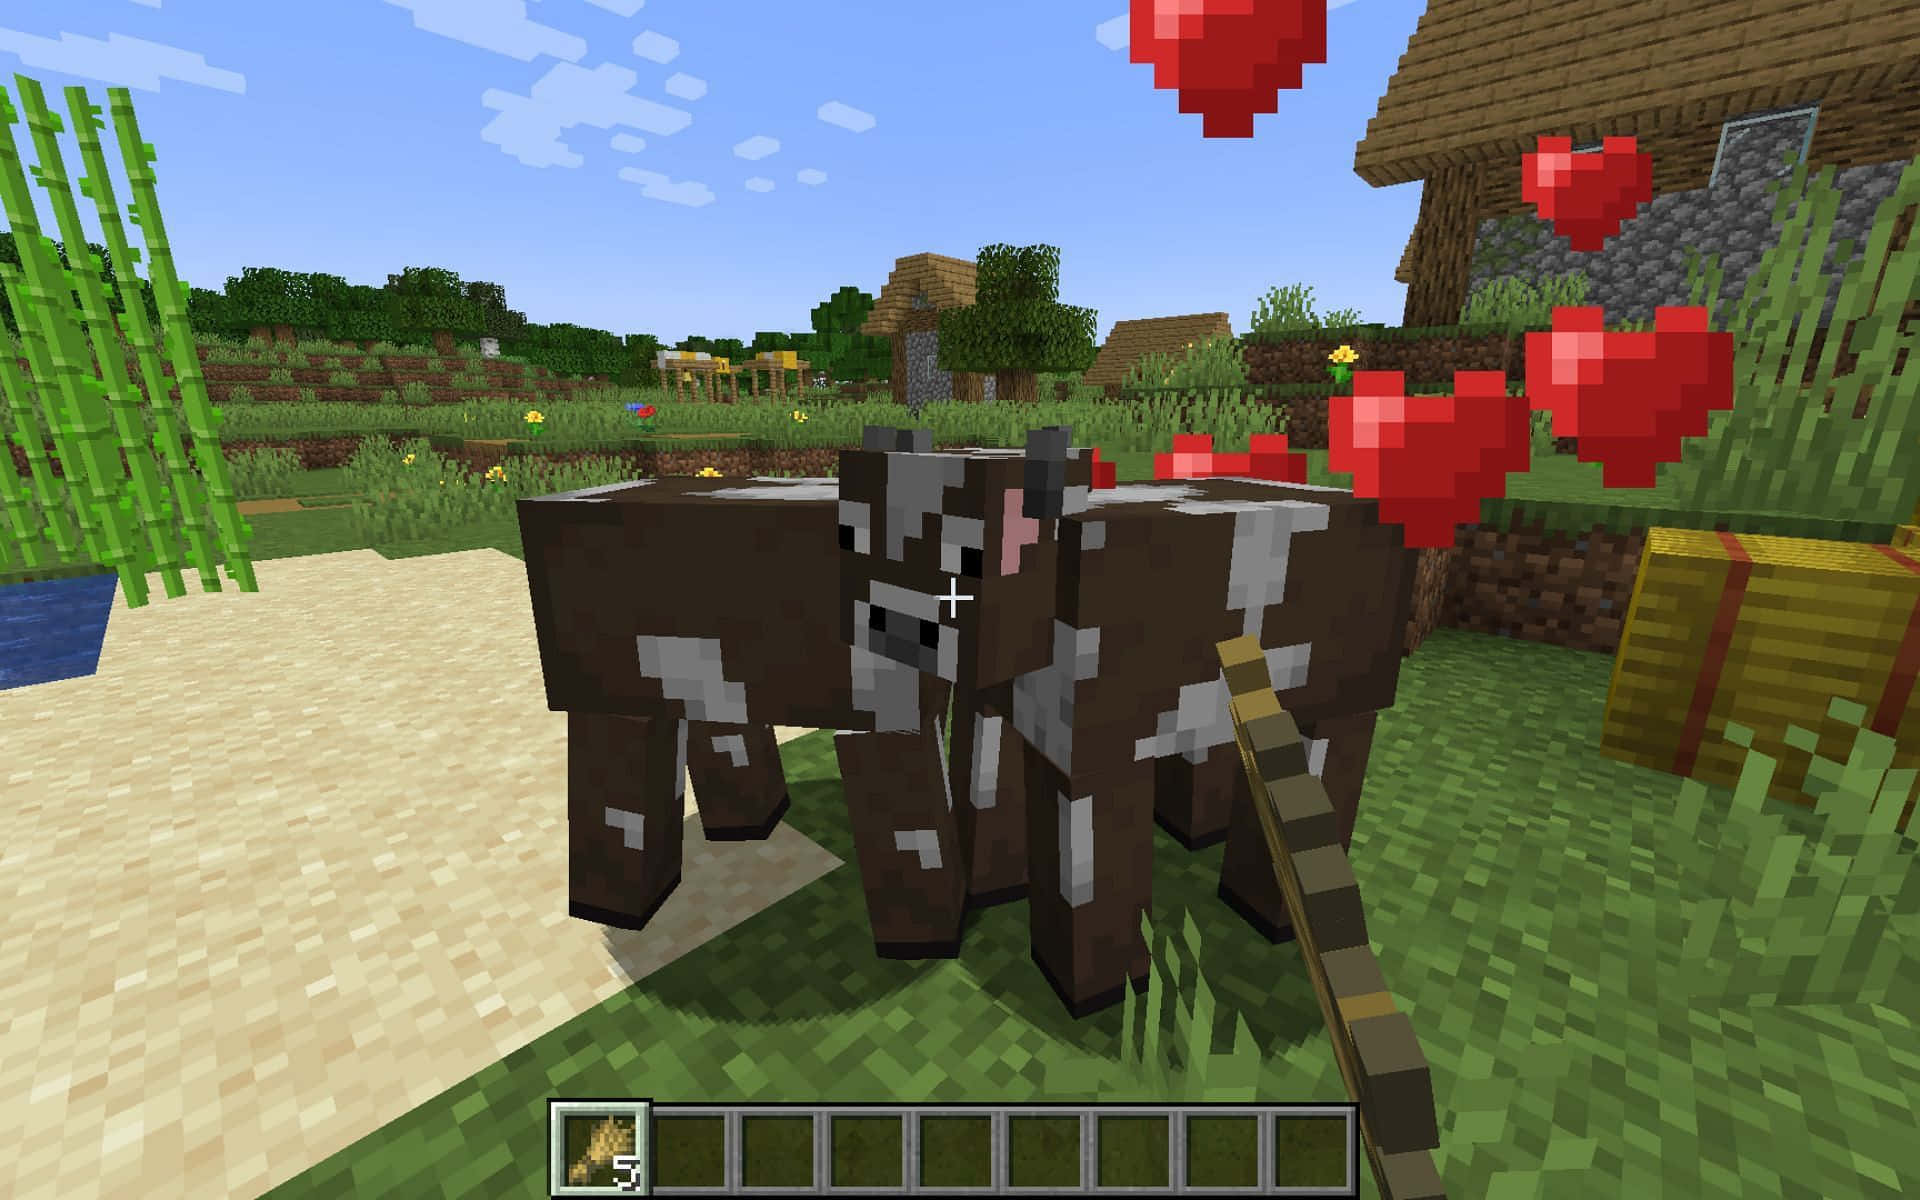 A Minecraft cow grazing on grass in the pixelated world Wallpaper